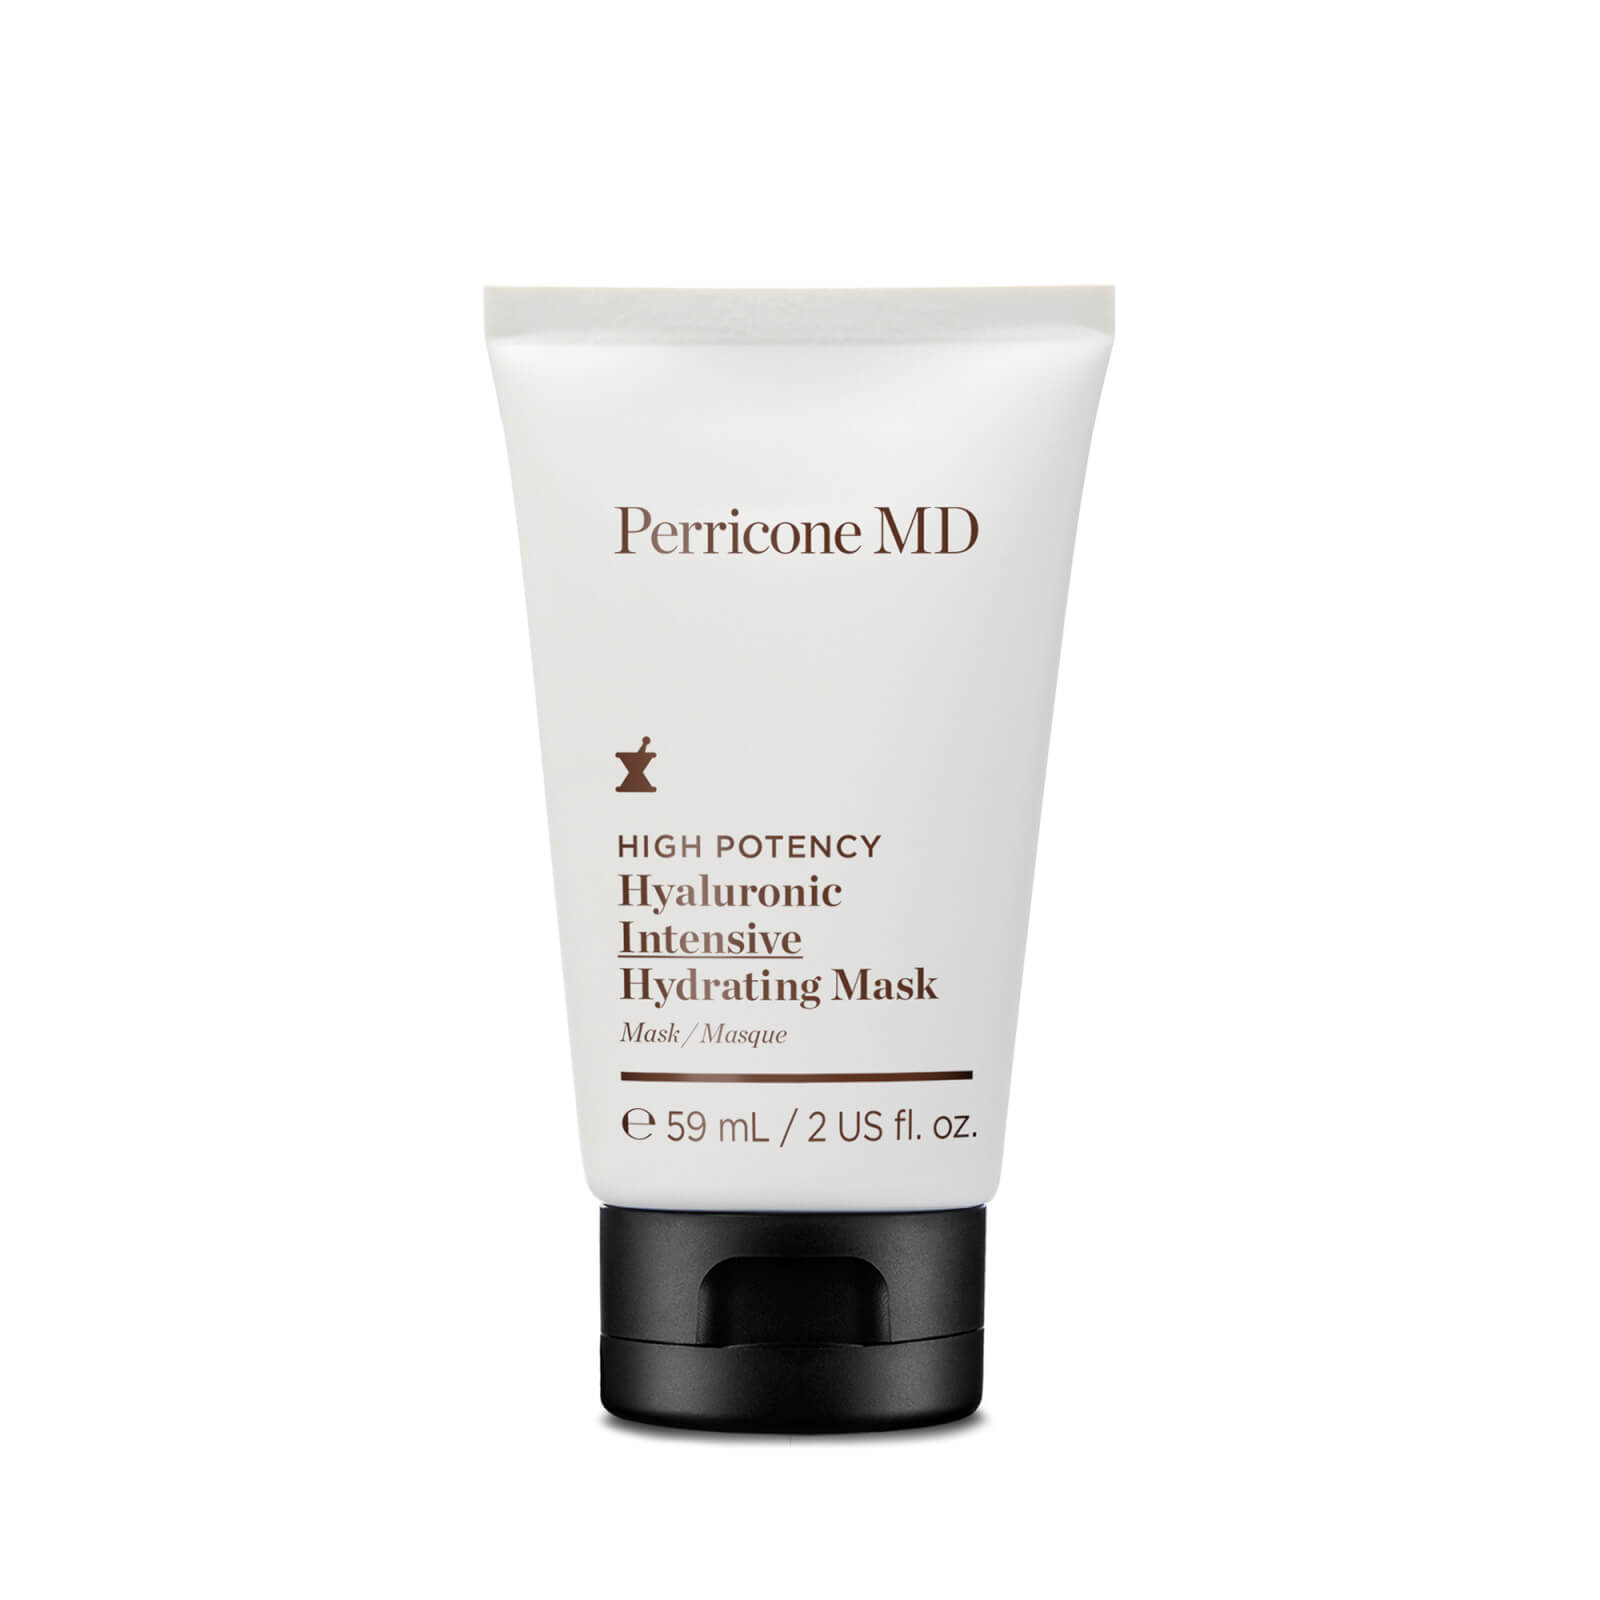 Perricone Md High Potency Hyaluronic Intensive Hydrating Mask